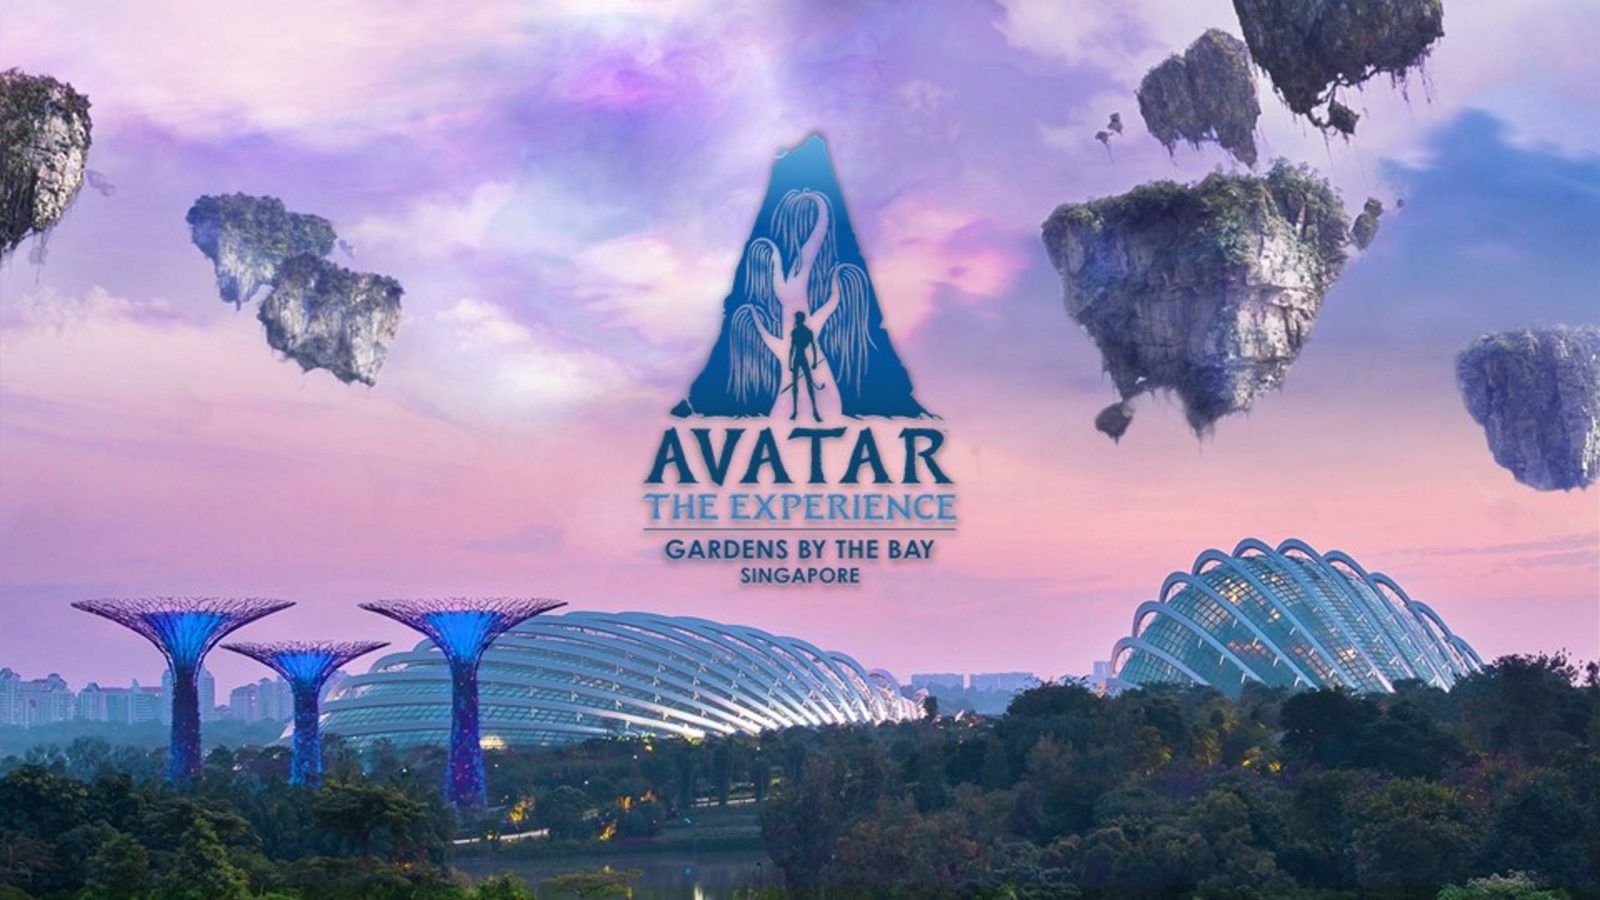 Avatar The Experience Is Officially Open In Singapore At Gardens By The  Bays Cloud Forest  Singapore Foodie